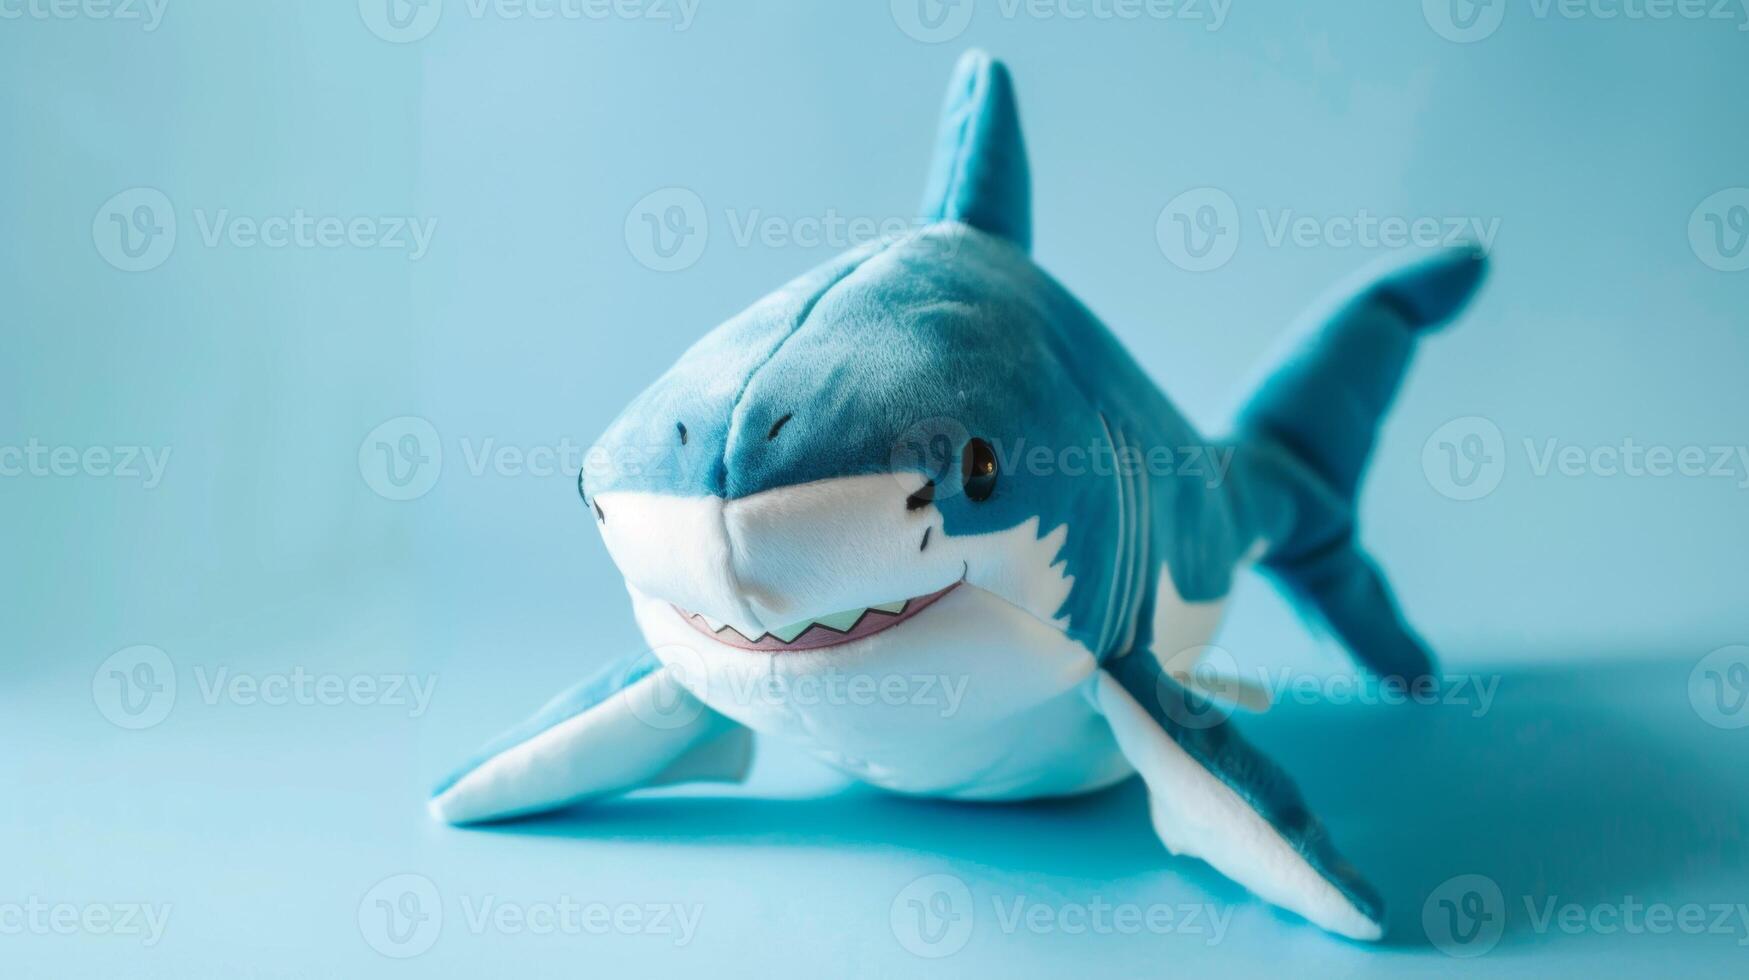 Cute blue shark stuffed toy with smiling face and aquatic theme on a soft background photo